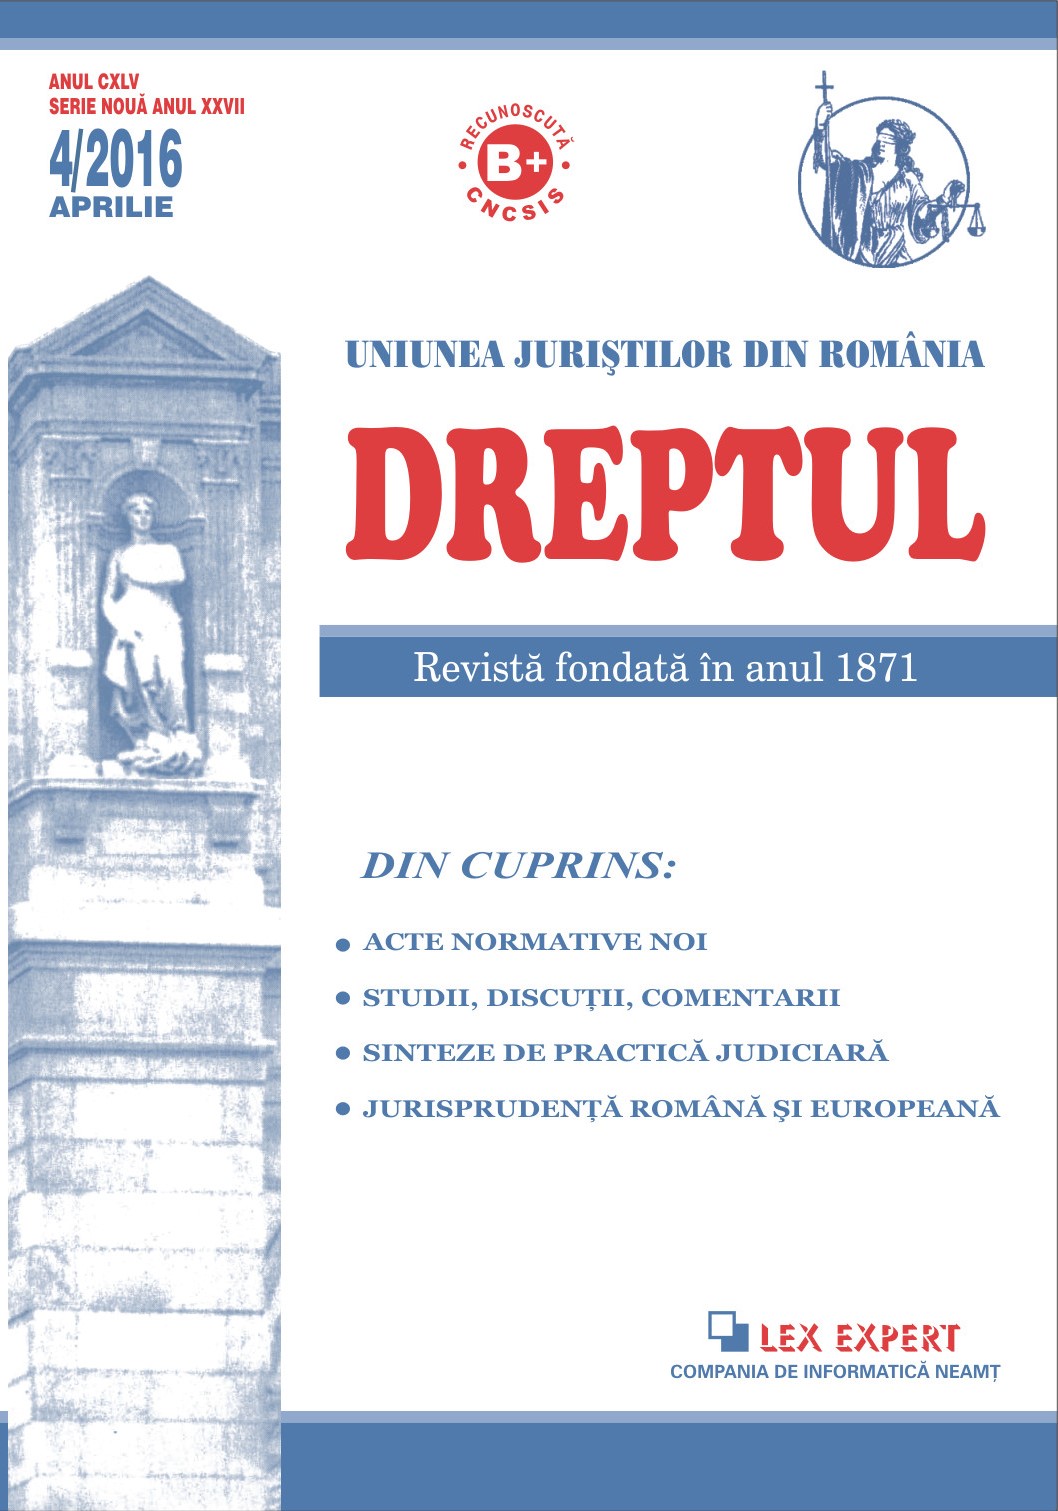 Some considerations on the free access to justice established by Article 21 of the Romanian Constitution, republished Cover Image